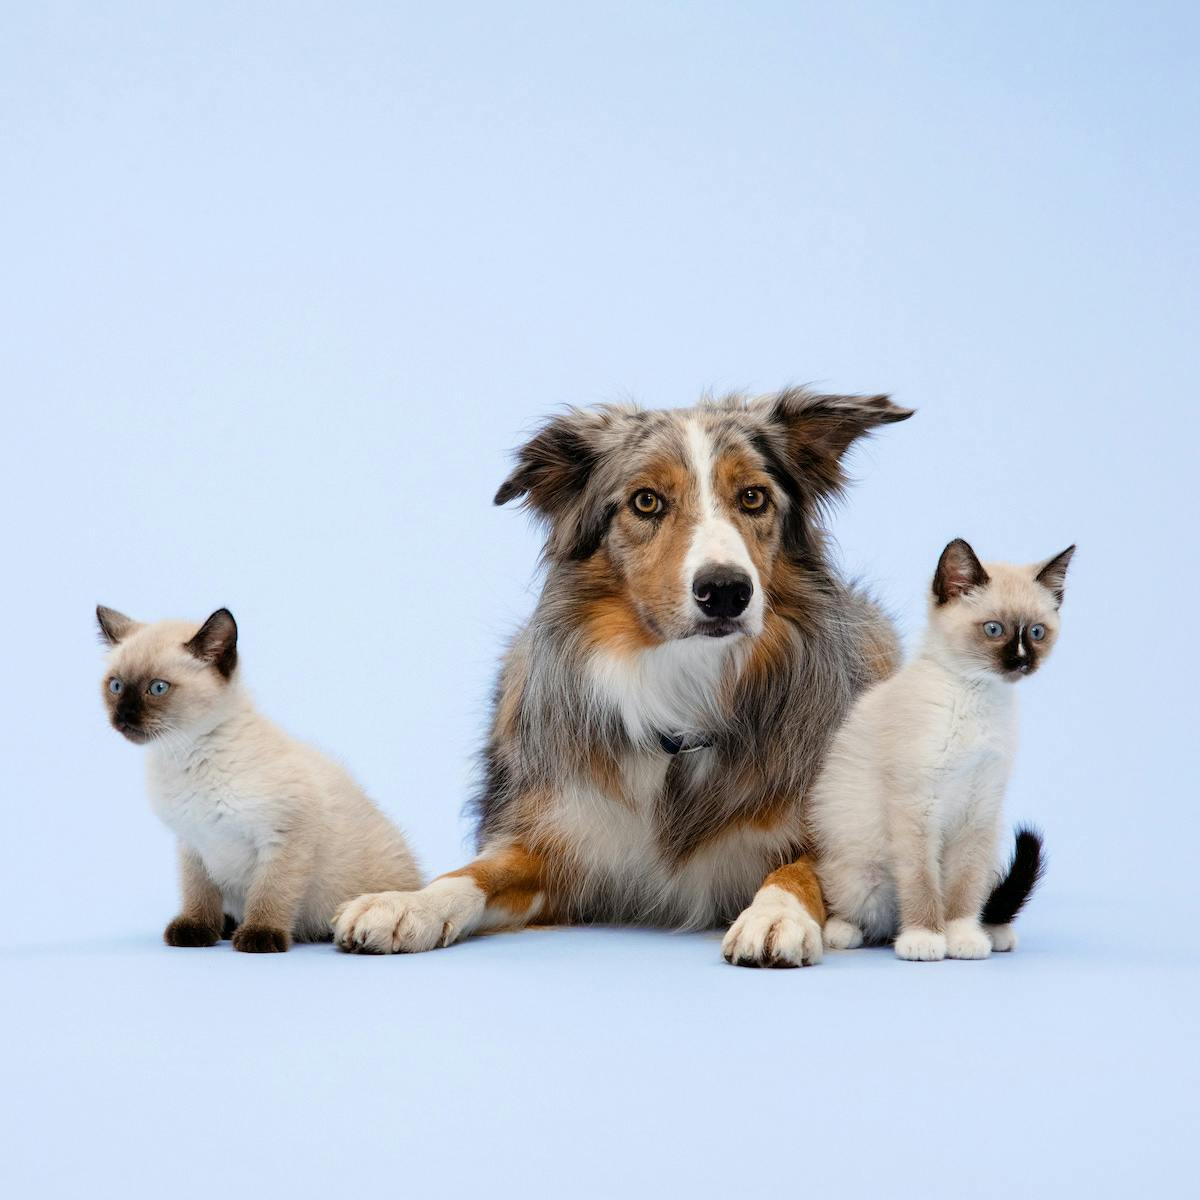 Dog with two kittens sitting in light blue background